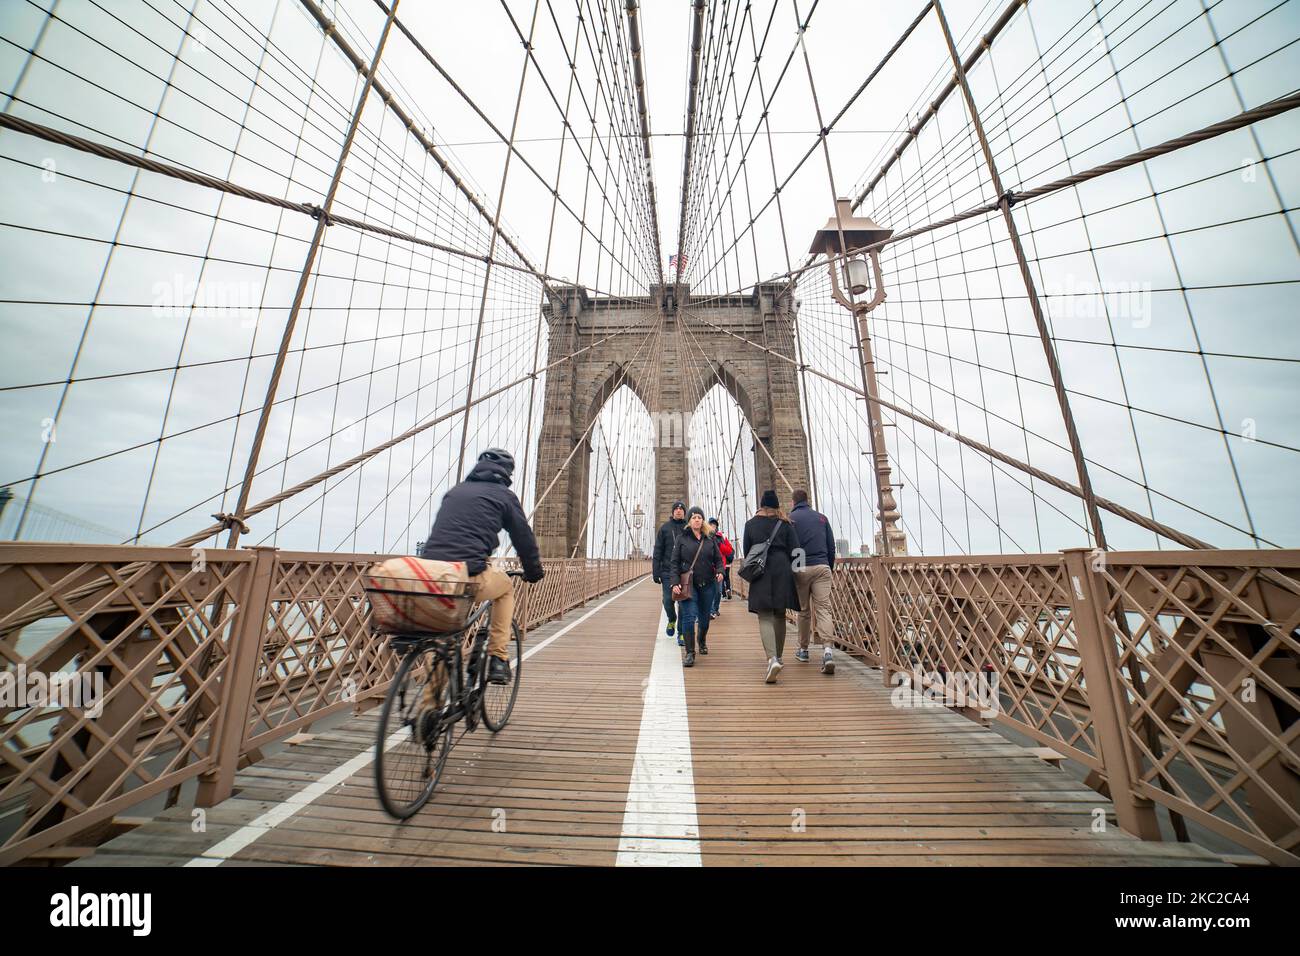 Pedestrians and bicycles on brooklyn bridge. The Brooklyn Bridge in New York City in the United States as seen during a cloudy day with tourists and locals on it. The famous bridge, a landmark for NYC and the United States of America is a hybrid cable stayed suspension bridge spanning the East River between the boroughs of Manhattan and Brooklyn. The historical NY landmark bridge was built between 1869 and 1883. New York, USA on February 13, 2020 (Photo by Nicolas Economou/NurPhoto) Stock Photo